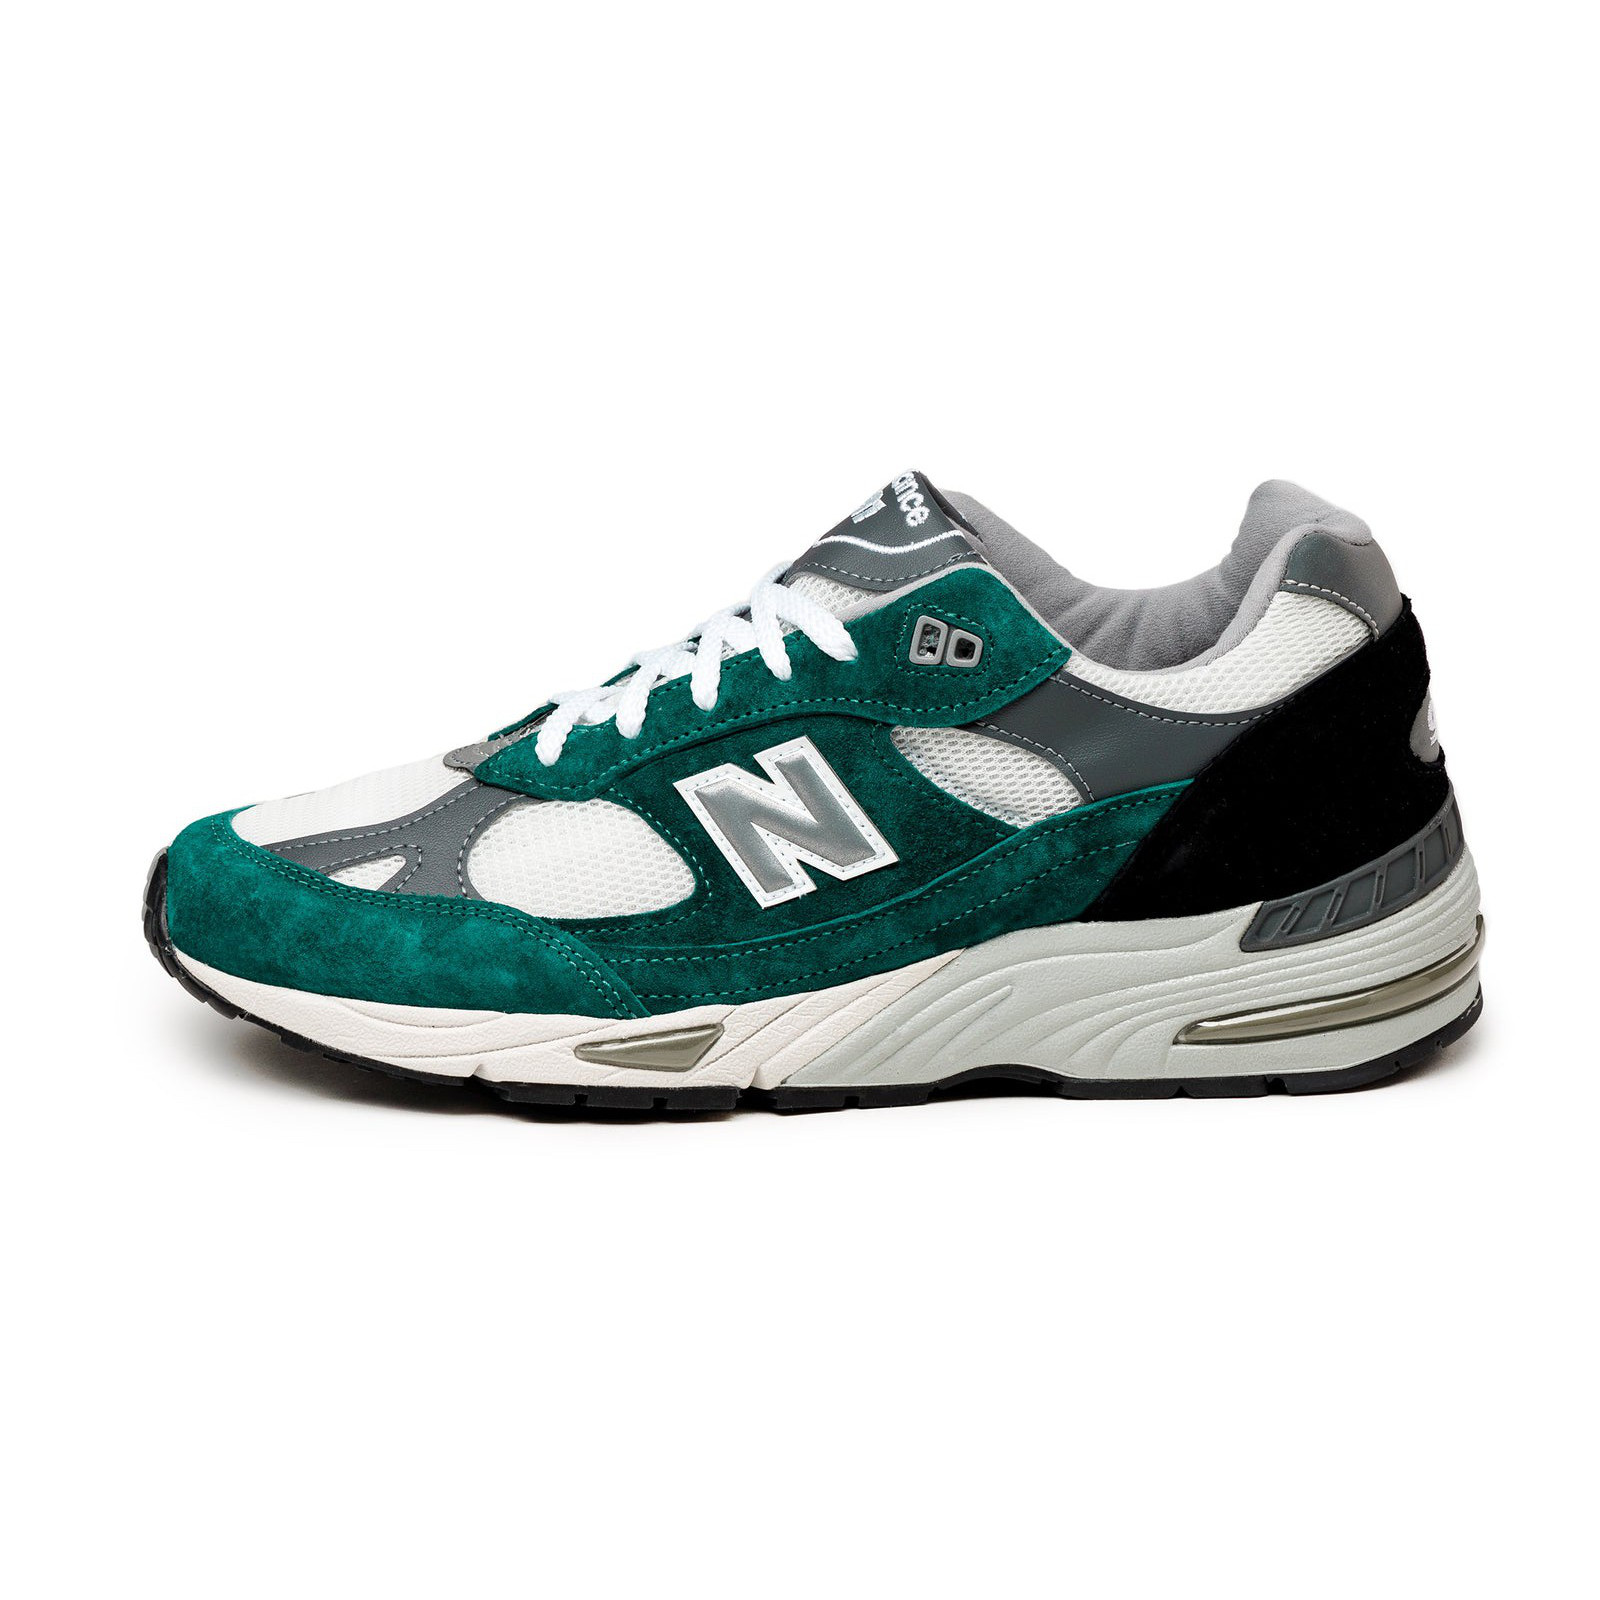 New Balance M991TLK
Made in England
Pacific / Alloy